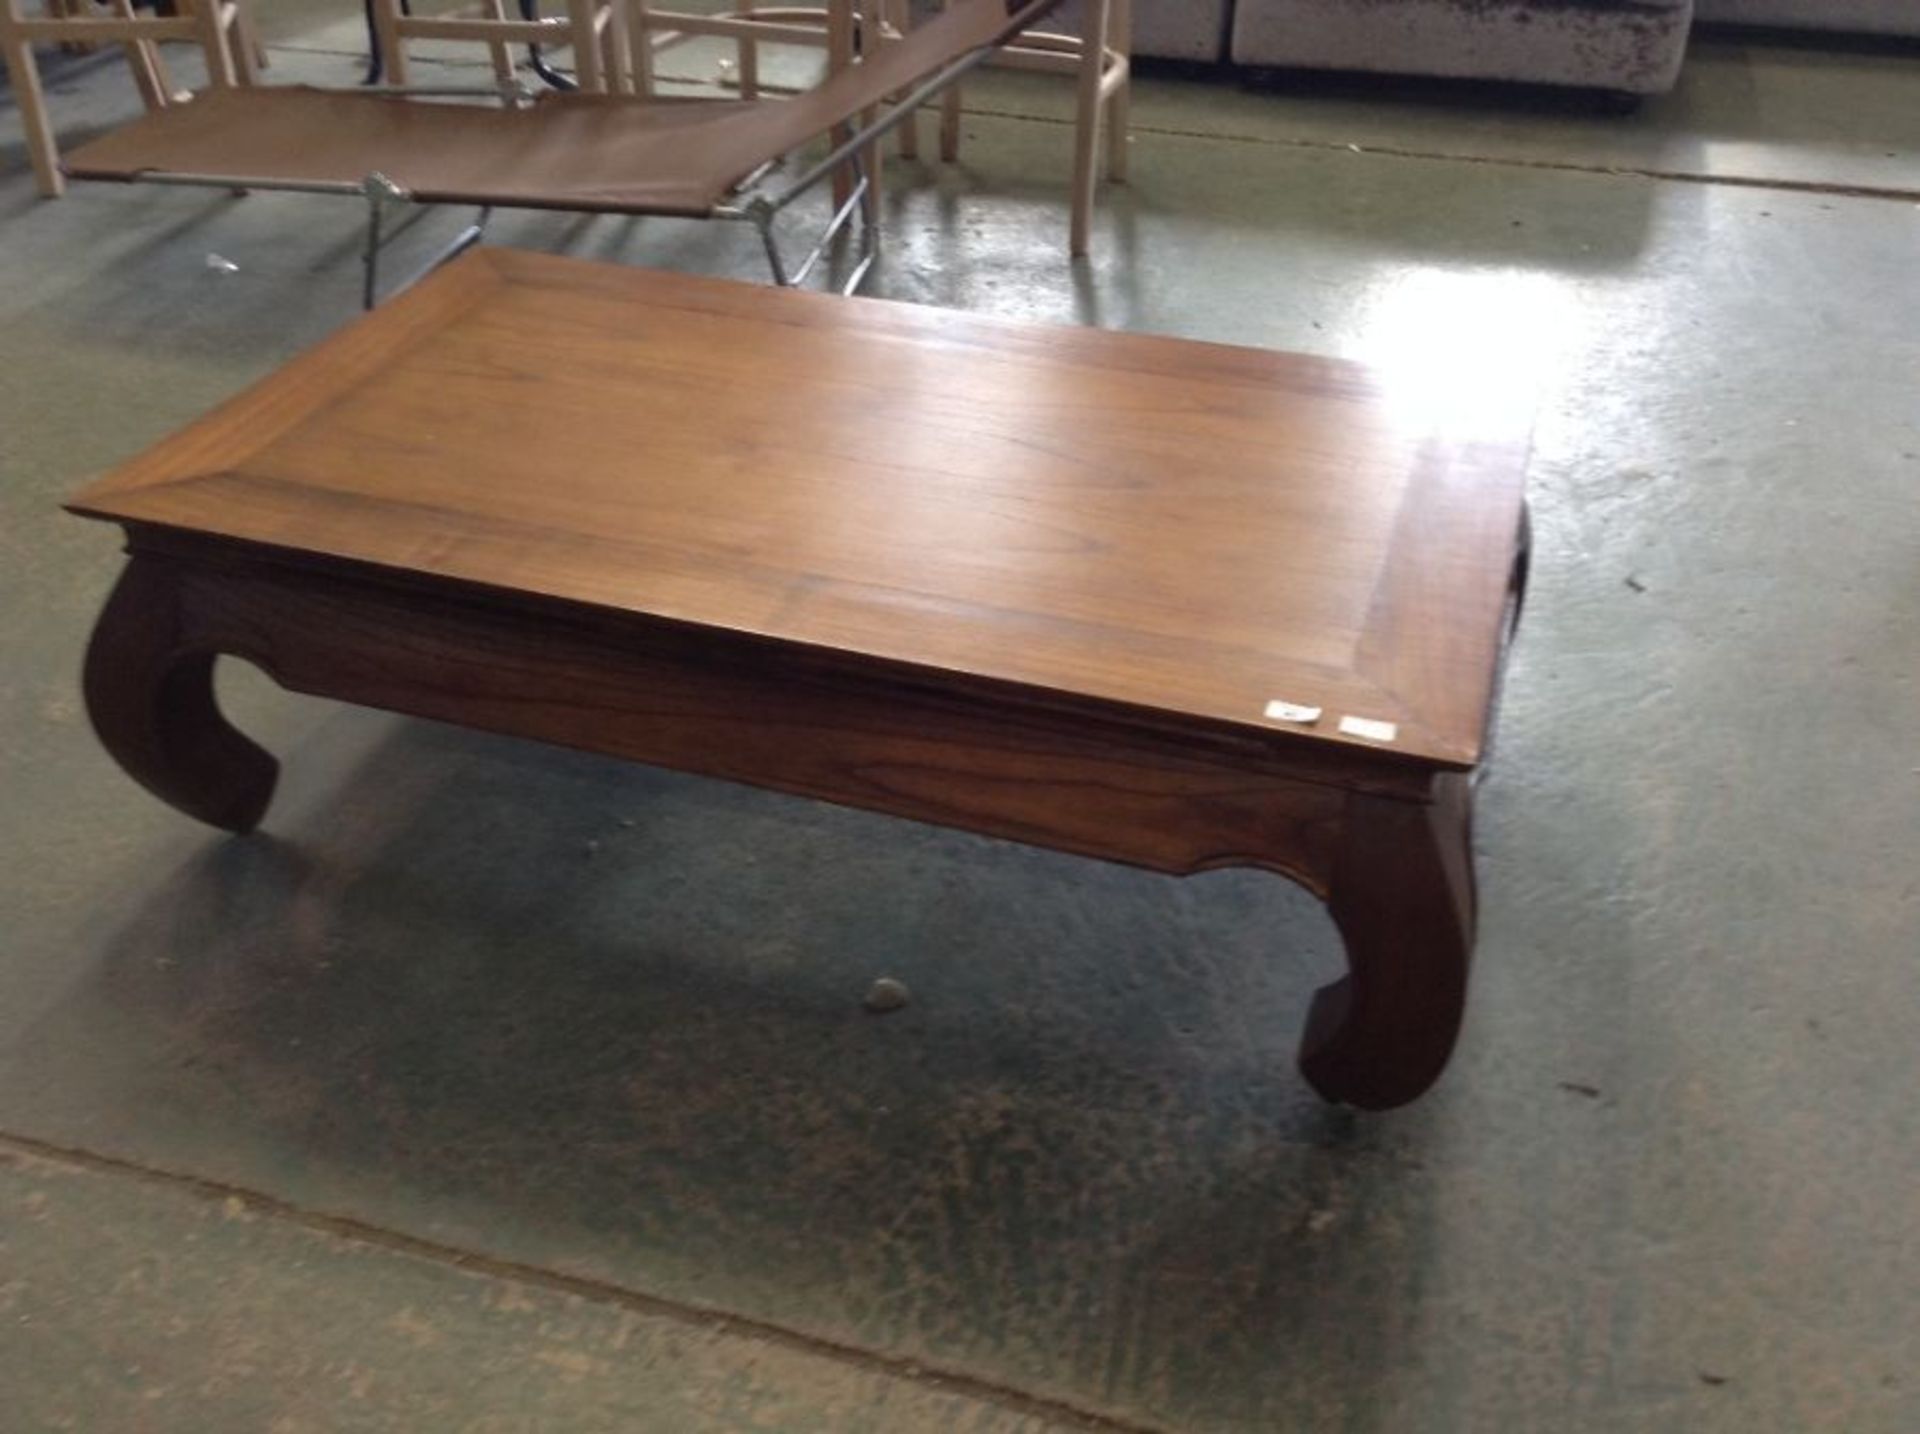 Bay Isle Home,Guildhall Coffee Table RRP£449.99 (HL9 - 9/12 -MYCR2095.13680745)(DAMAGED)